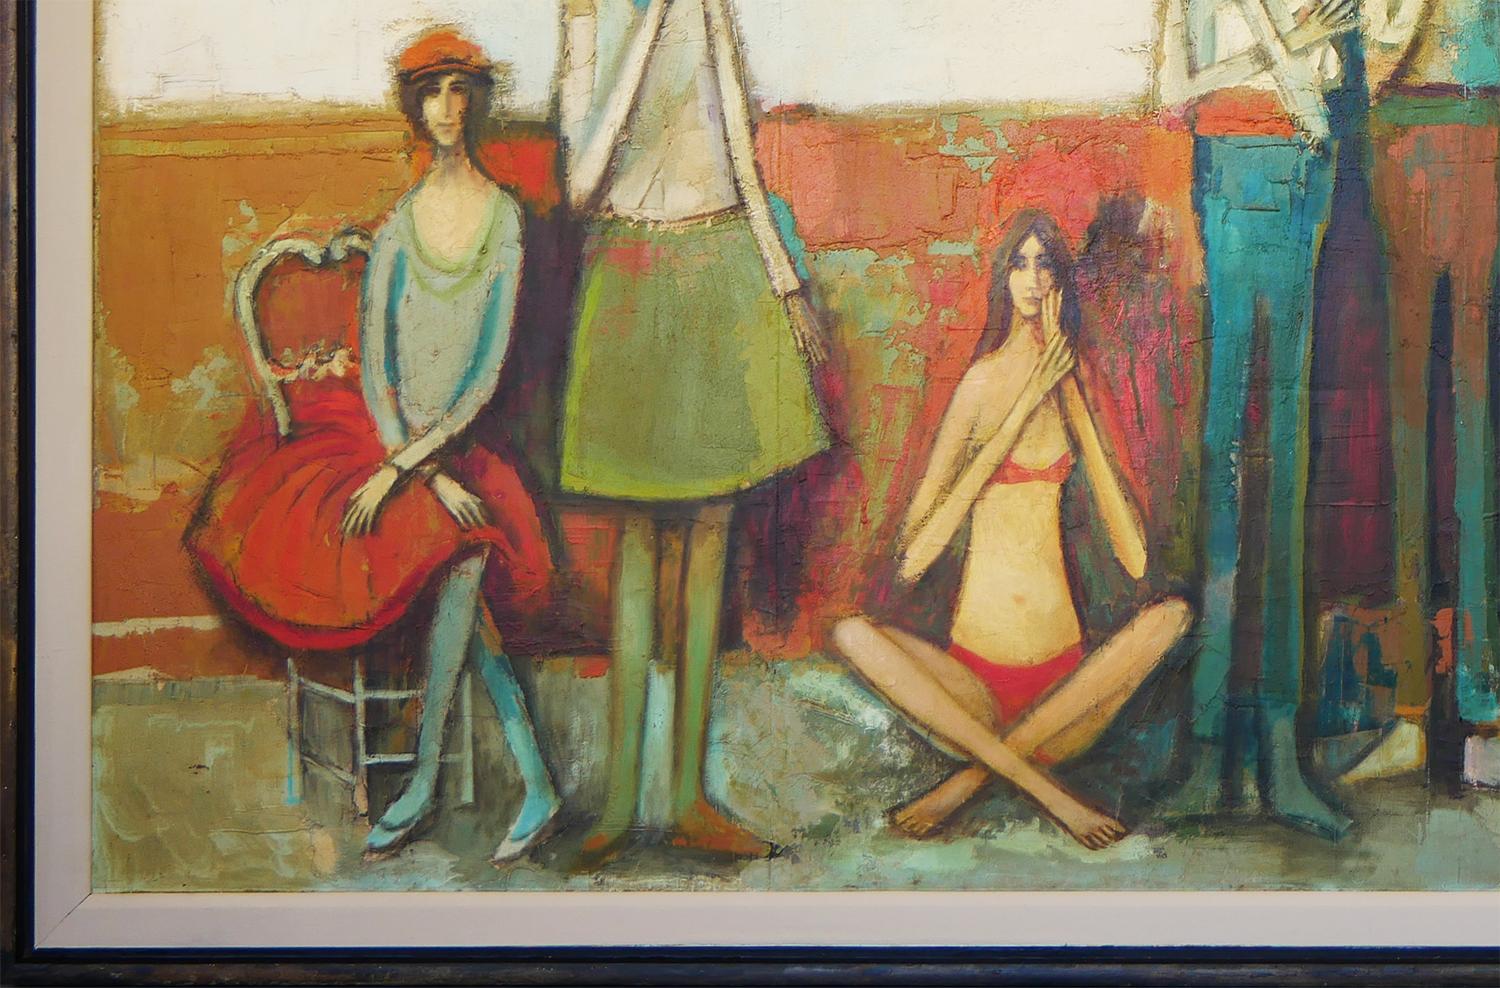 Modern abstract figurative portrait painting by Houston, TX artist David Adickes. The work features a grouping of six standing and sitting figures wearing colorful clothes posing next to an easel set against a neutral toned background. Signed by the